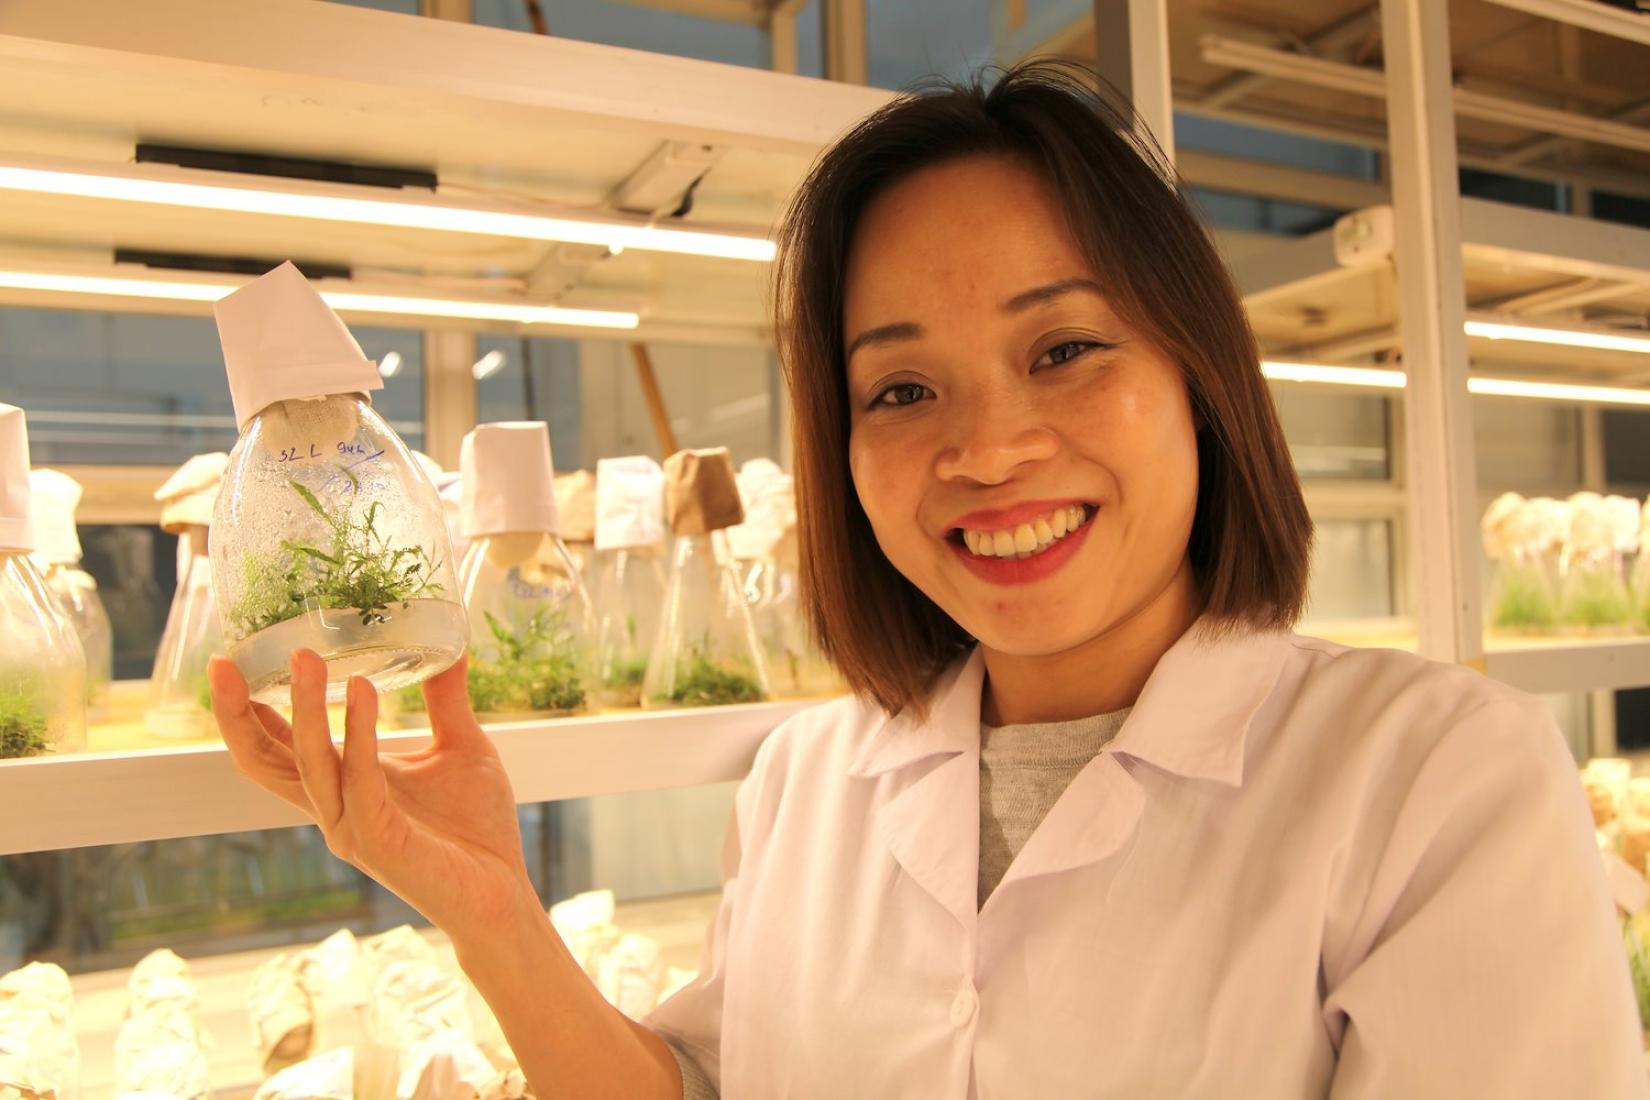 Female scientist holding up a plant in a glass bottle